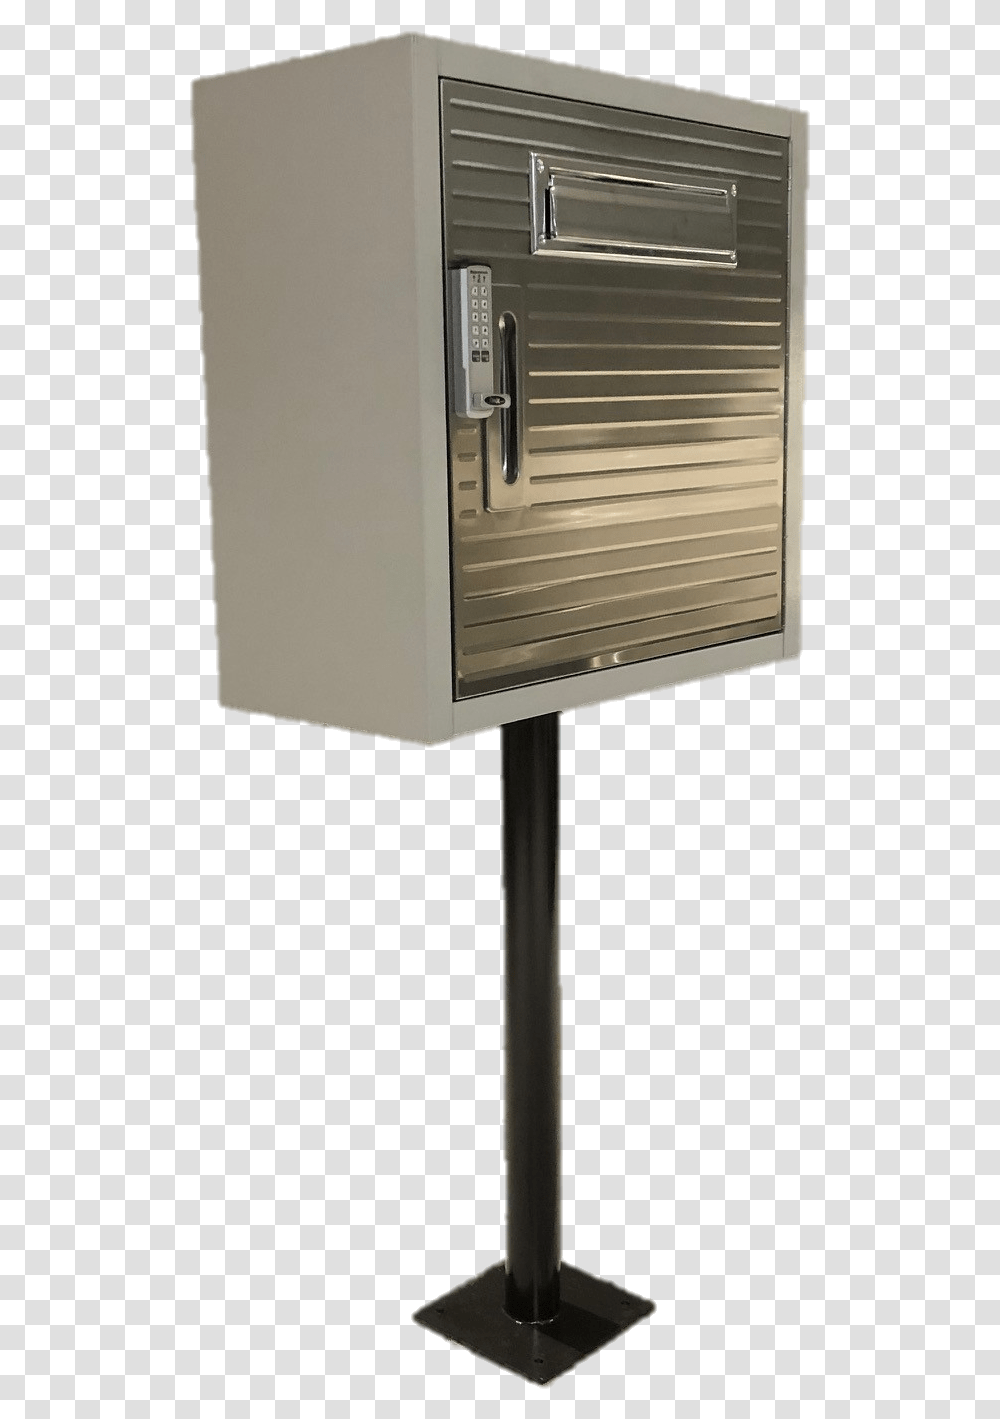 Lok Box Secure Package Delivery Locker For Amazon Wood, Mailbox, Letterbox, Private Mailbox, Home Decor Transparent Png